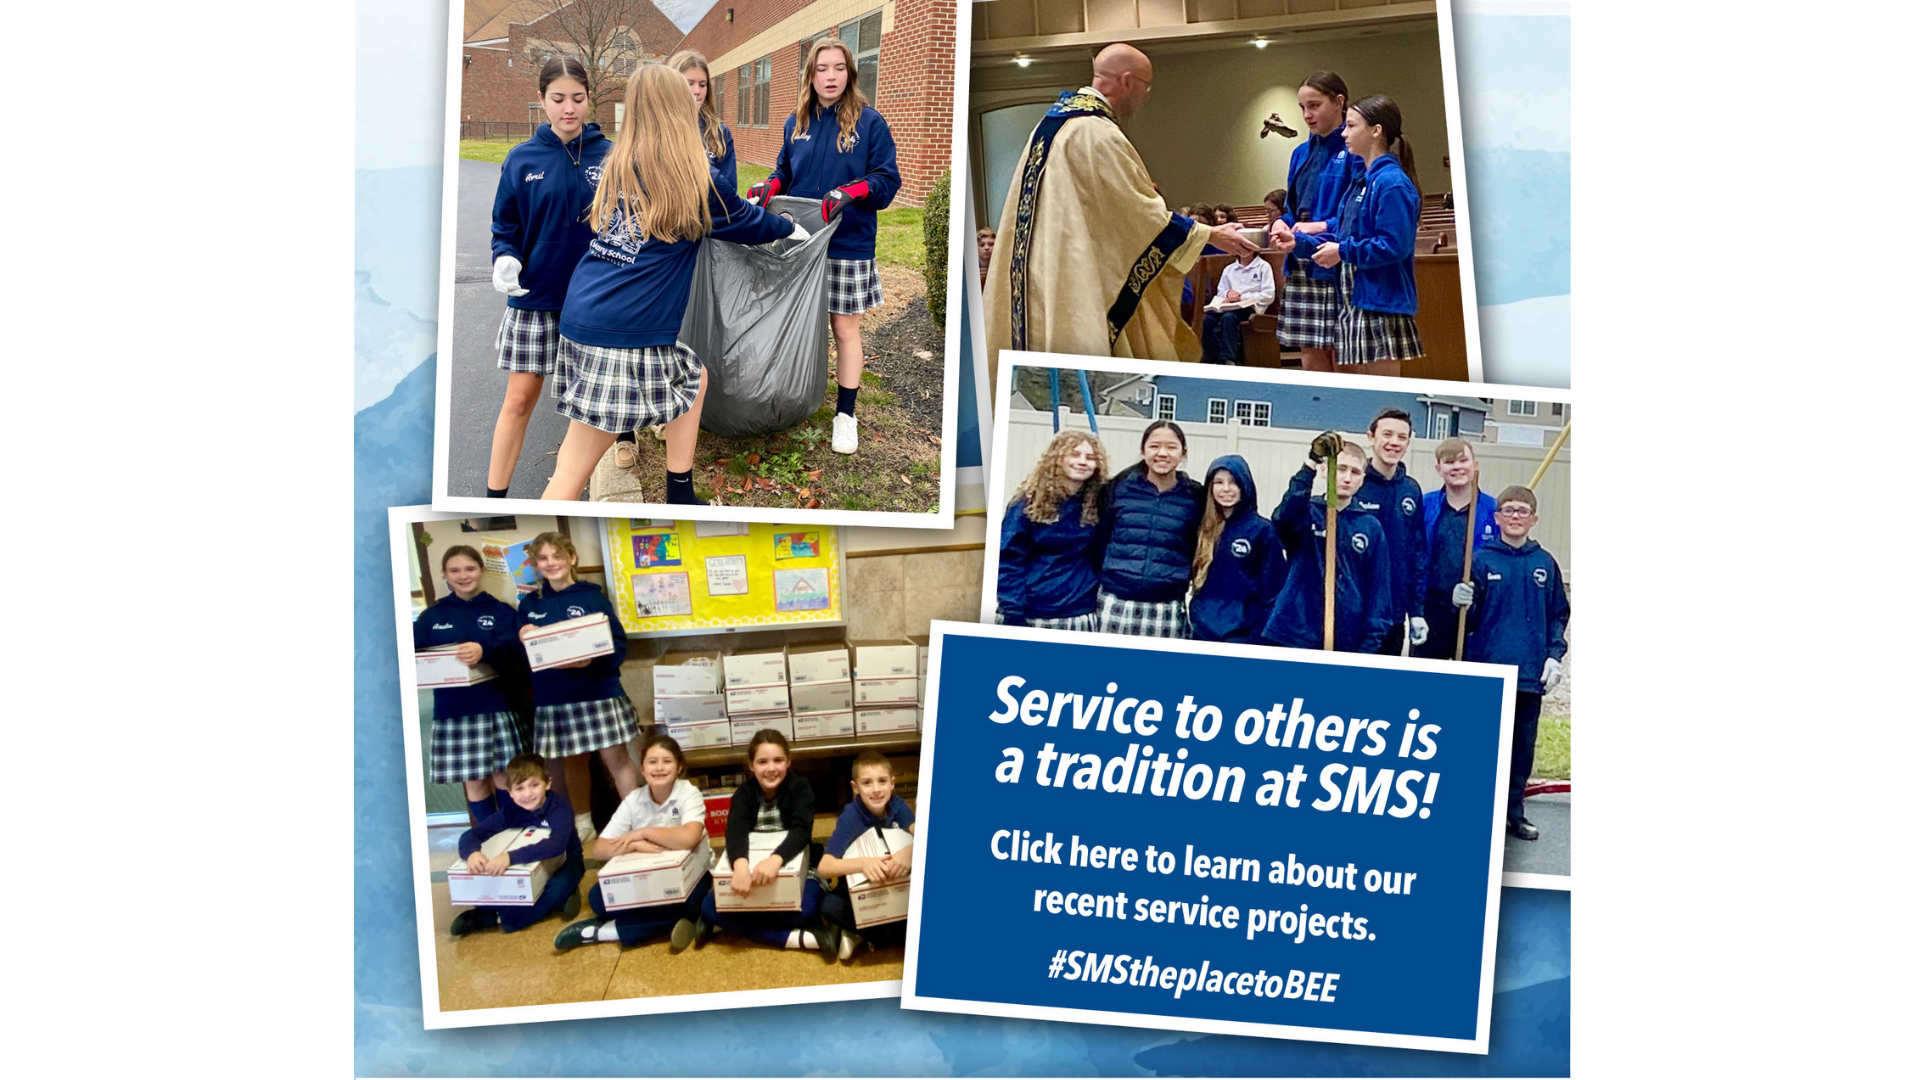 Servince to others-an important tradition at St. Mary School Swormville